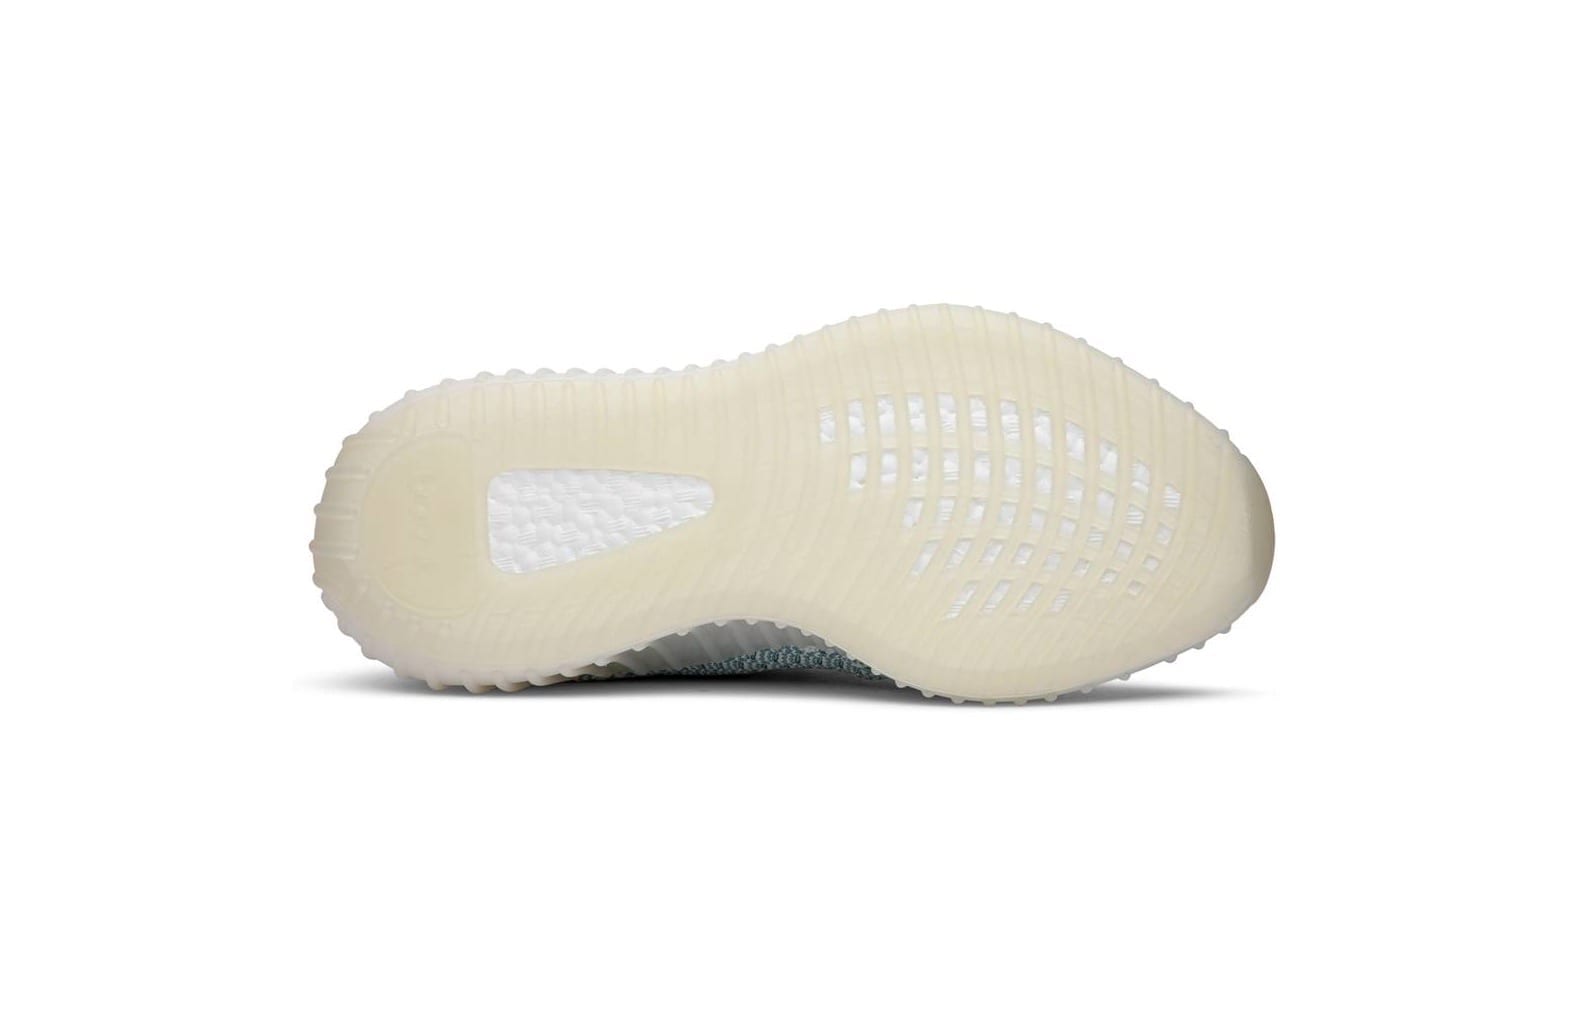 Adidas Yeezy Boost 350 V2 Cloud White Non-Reflective Yeezy